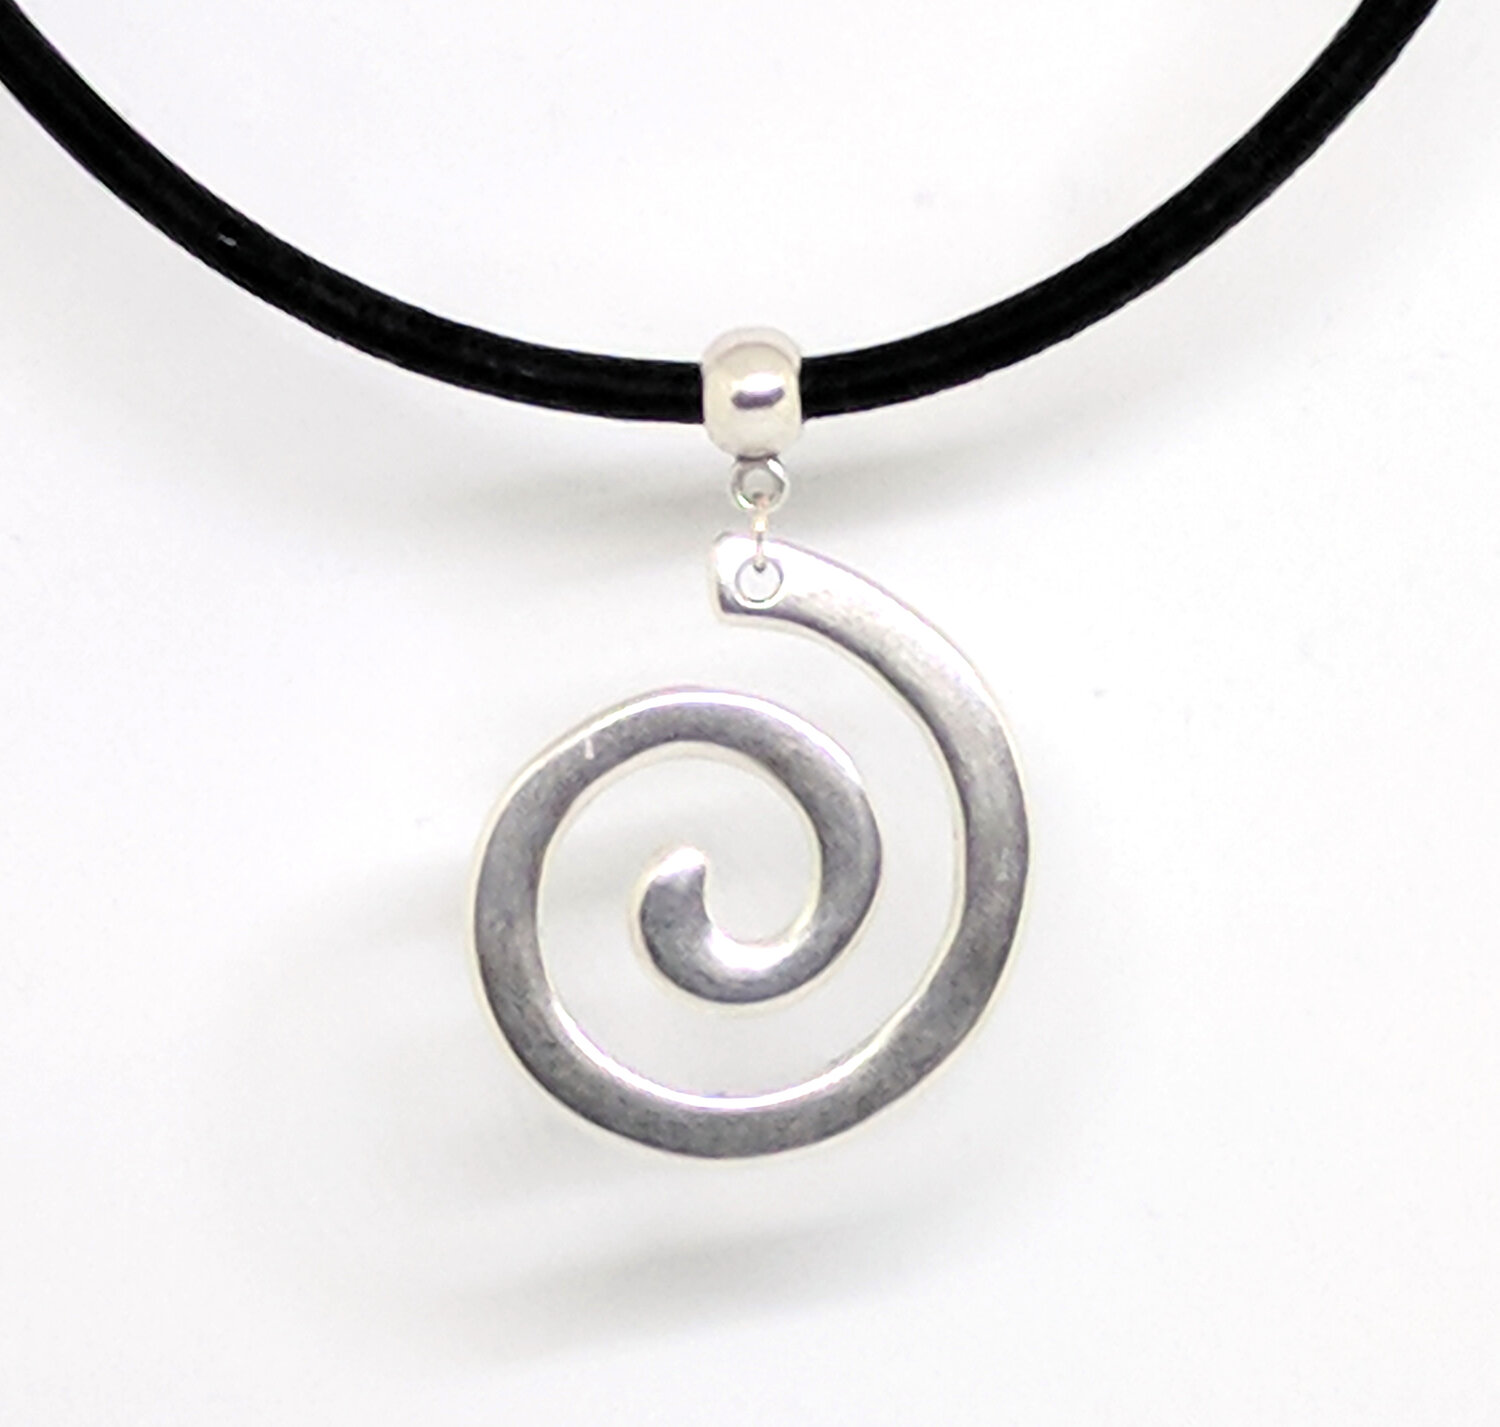 Cork Necklace With Open Greek Spiral Pendant